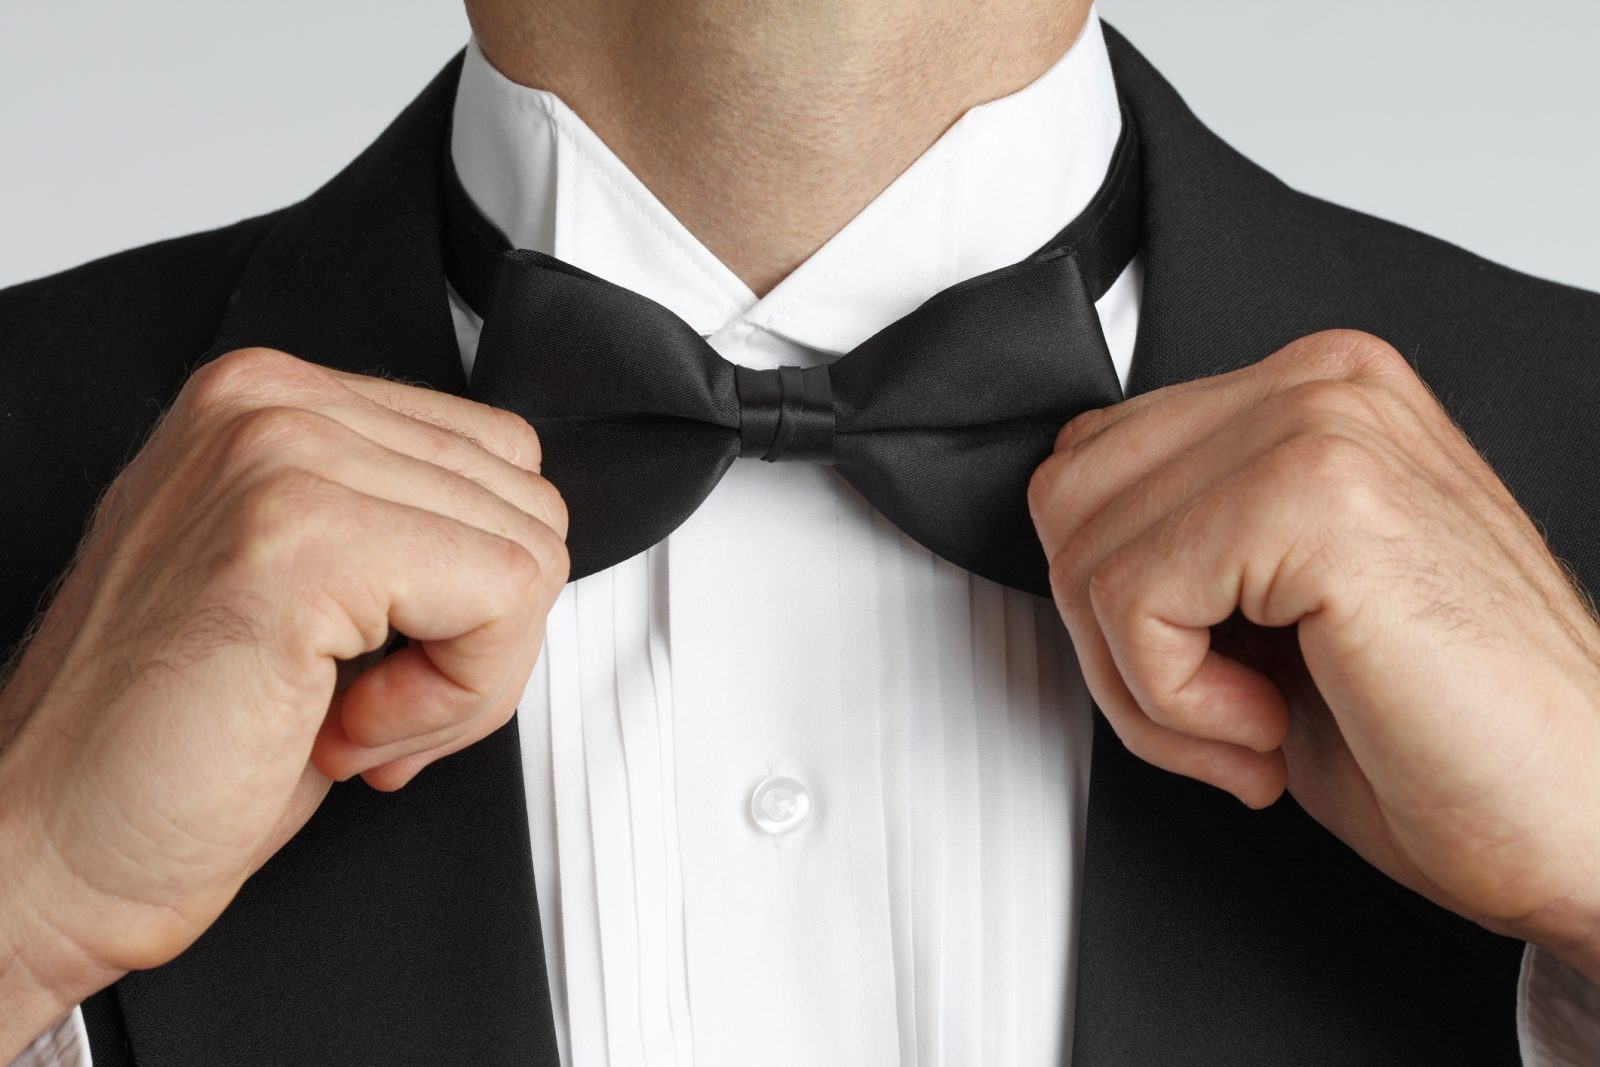 I'll Be Gobsmacked If You Can Score 20 on This True or False Trivia Test tuxedo